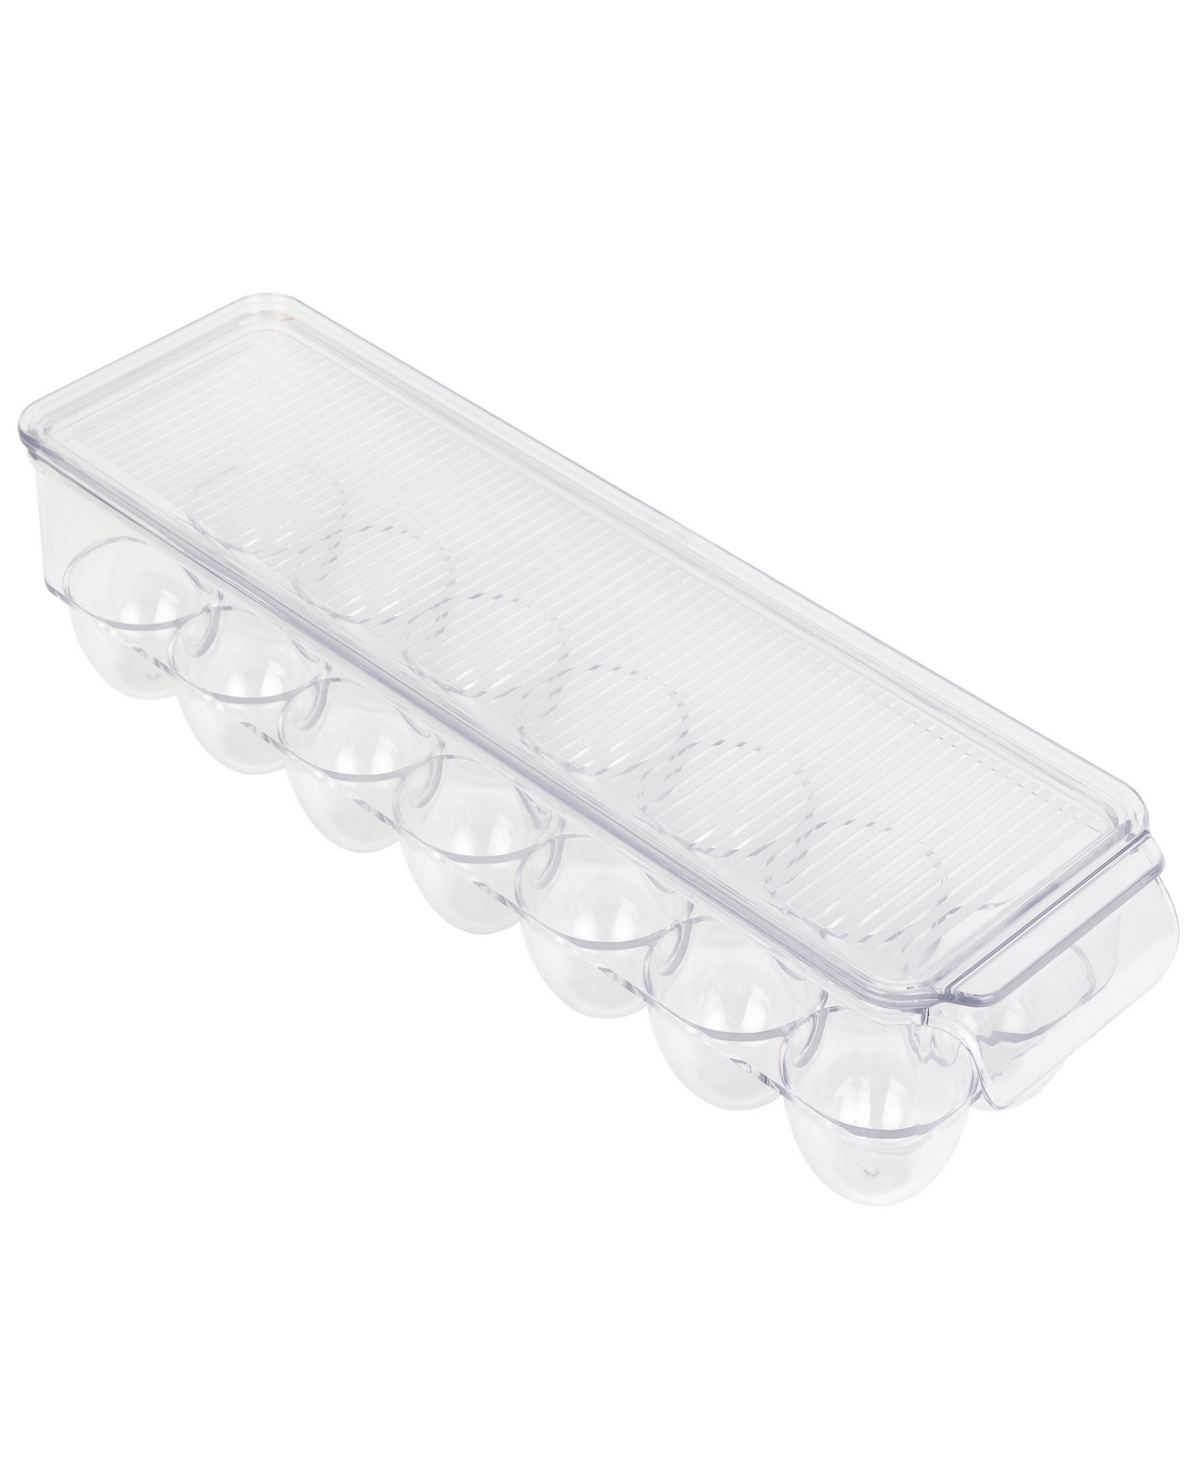 Smart Design Stackable Refrigerator Egg Holder Bin With Handle And Lid, 14.65" X 3.25" In Clear